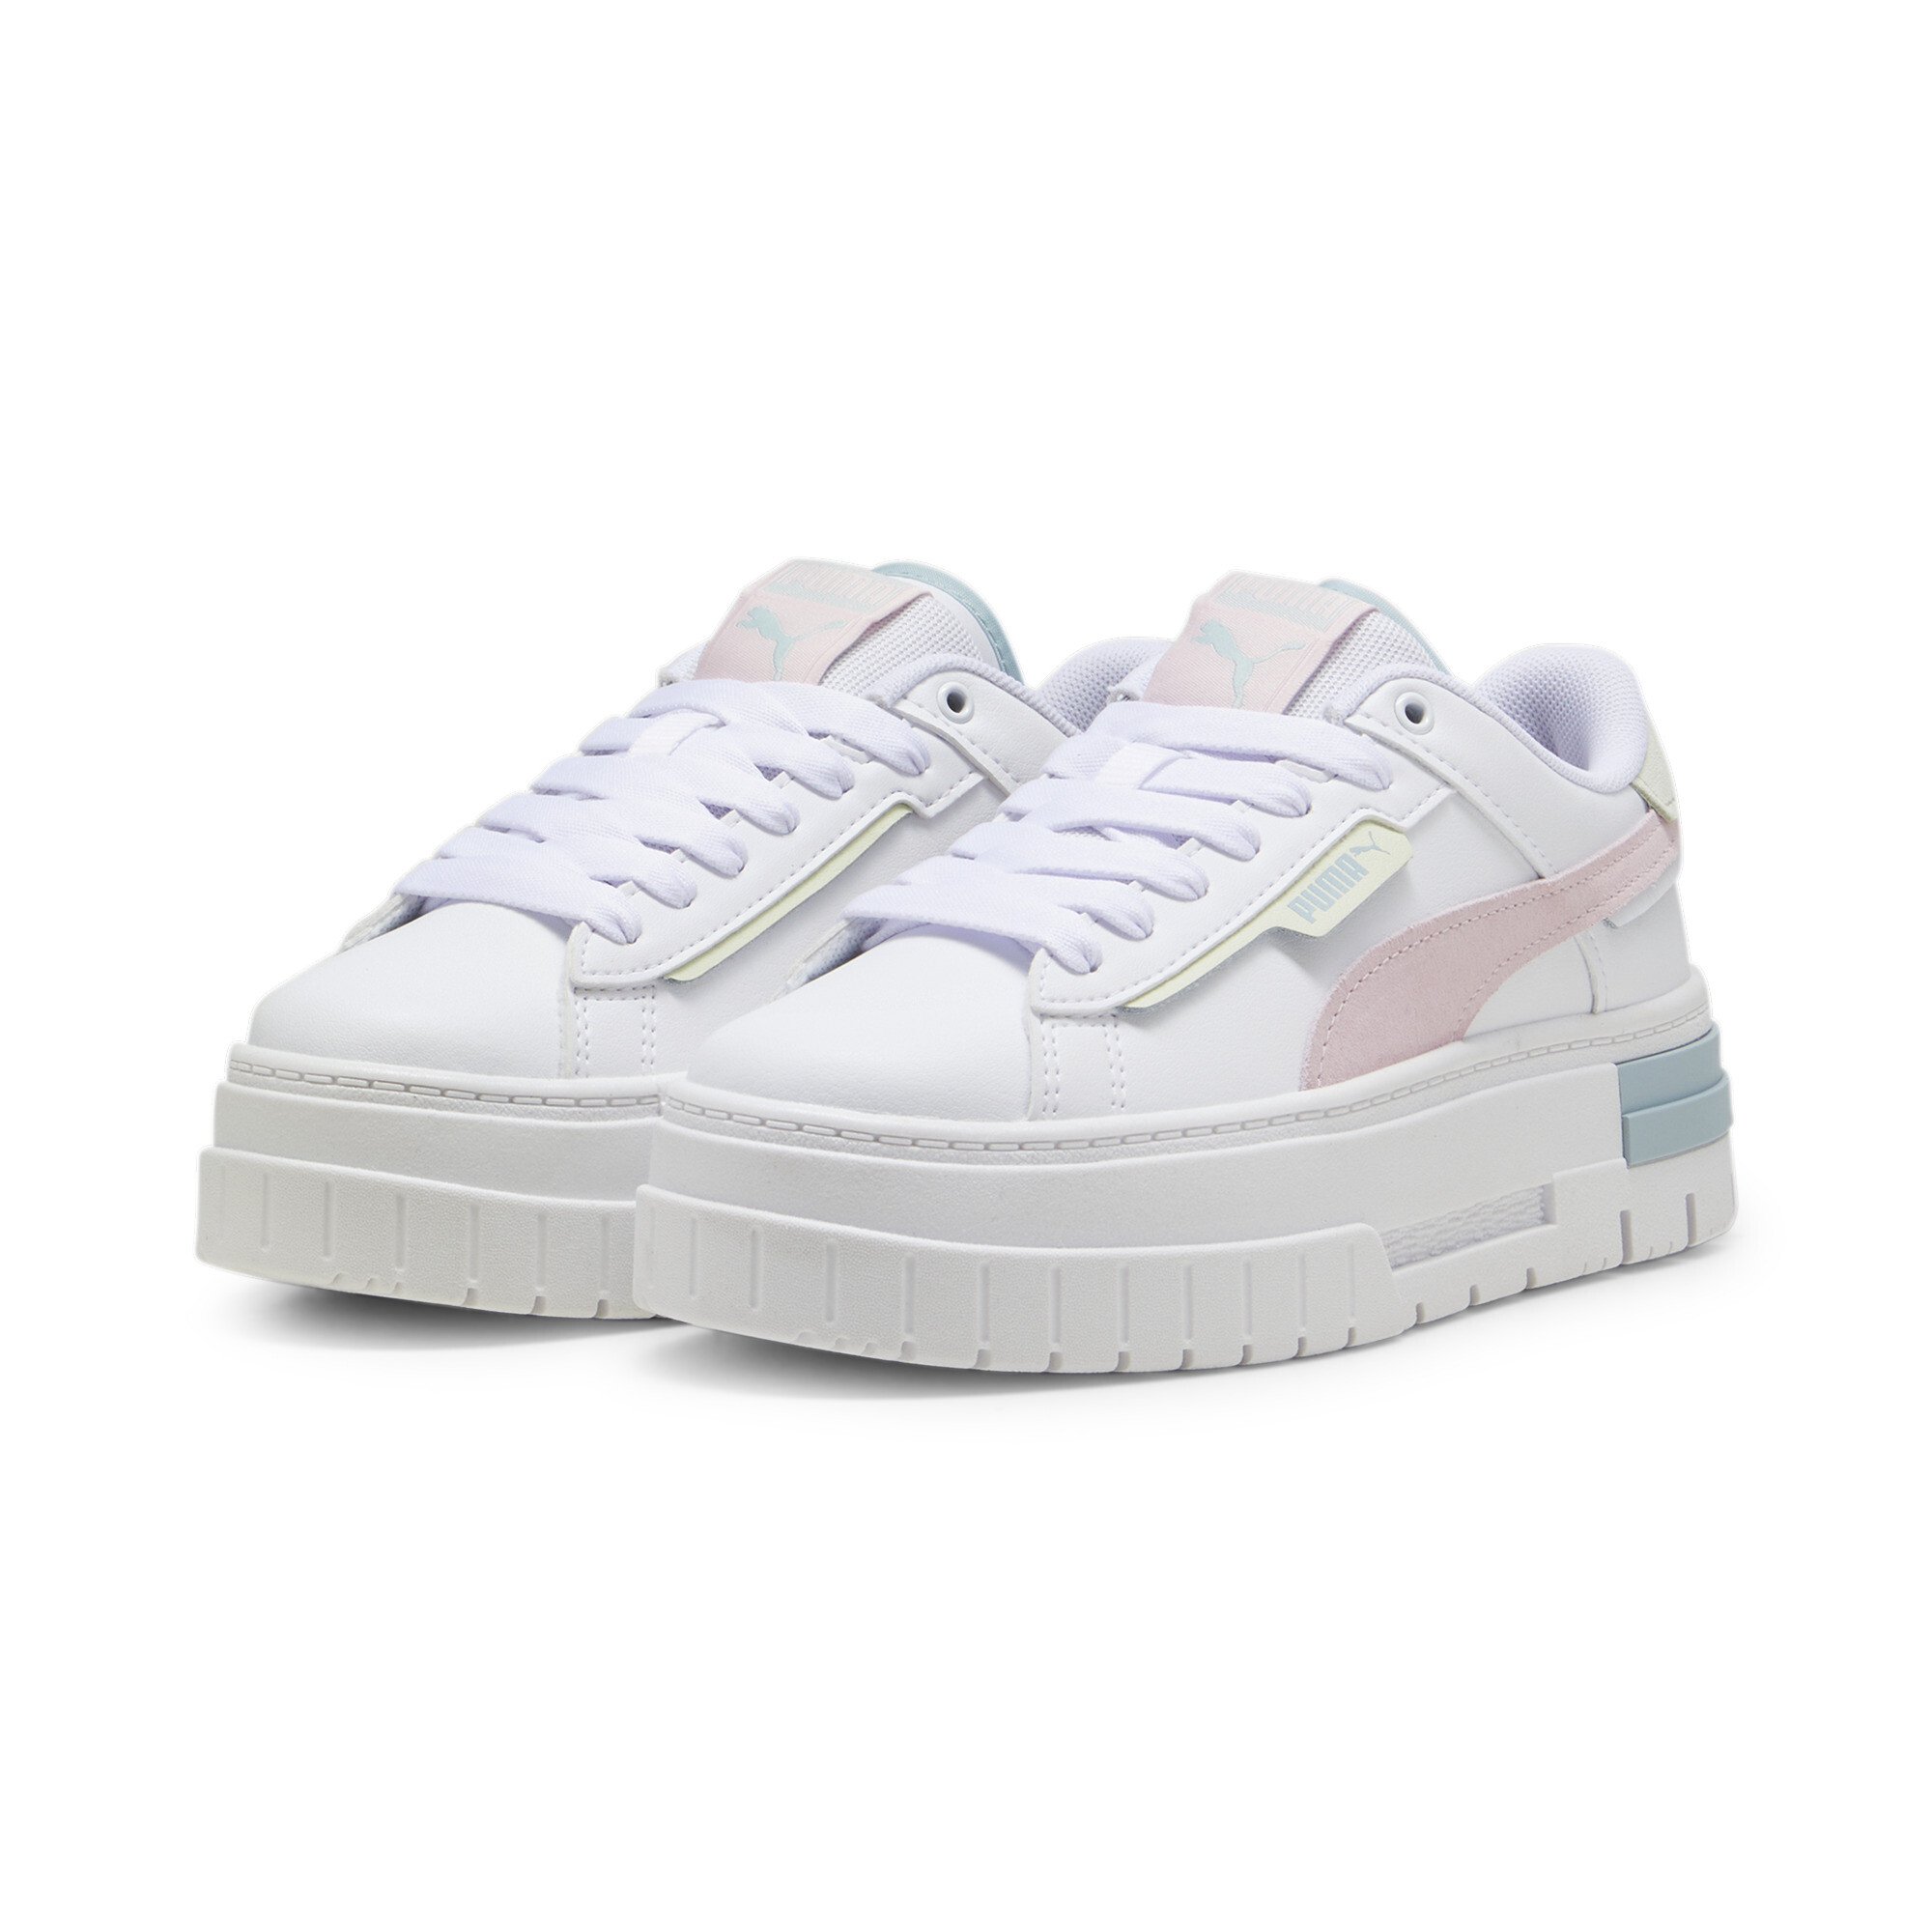 Women's Puma Mayze Crashed Youth Sneakers, White, Size 36, Shoes